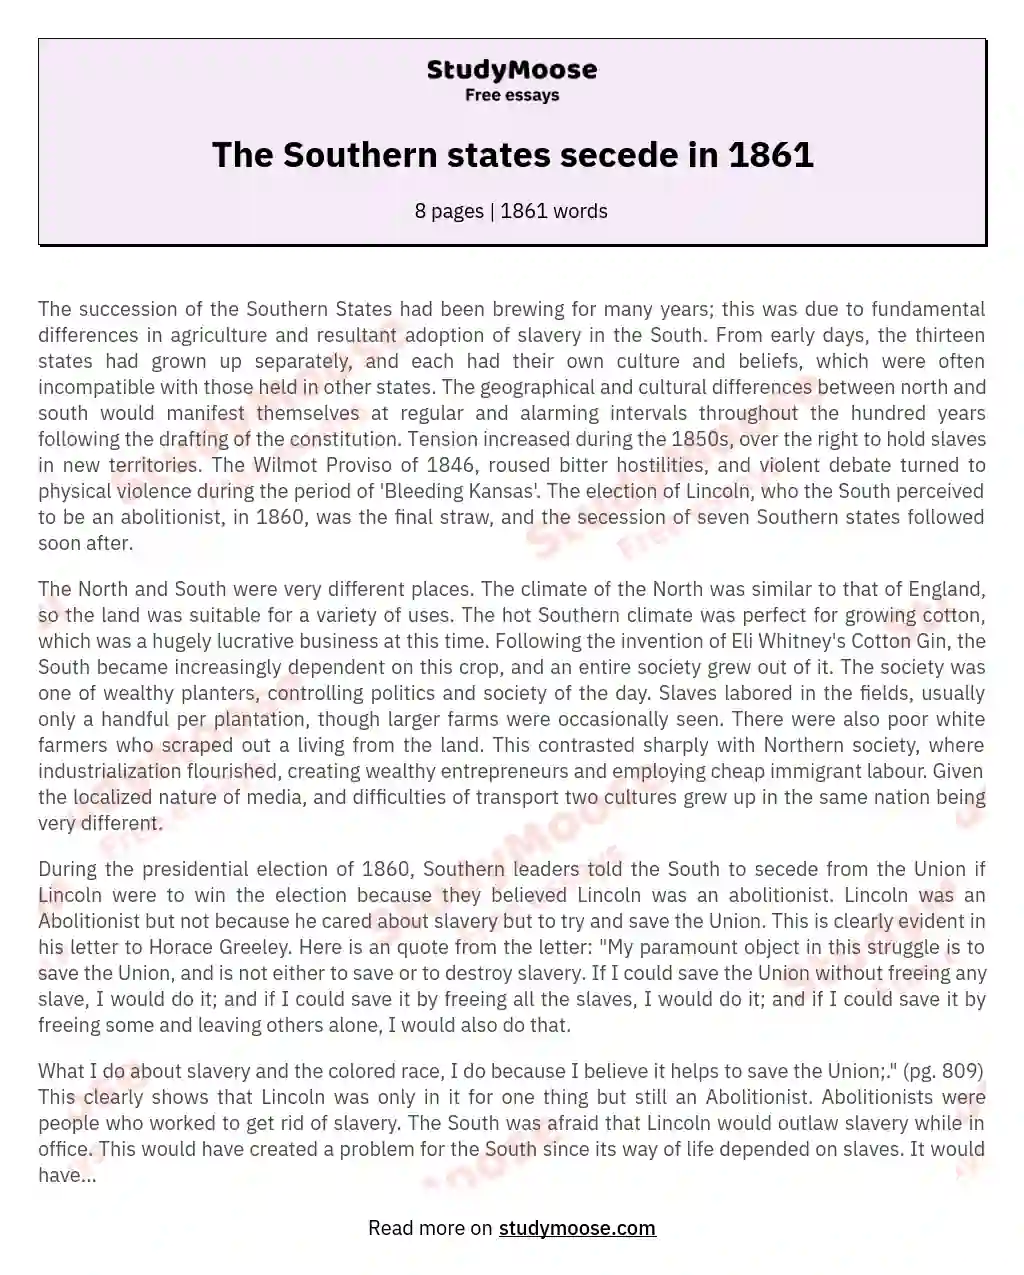 The Southern states secede in 1861 essay